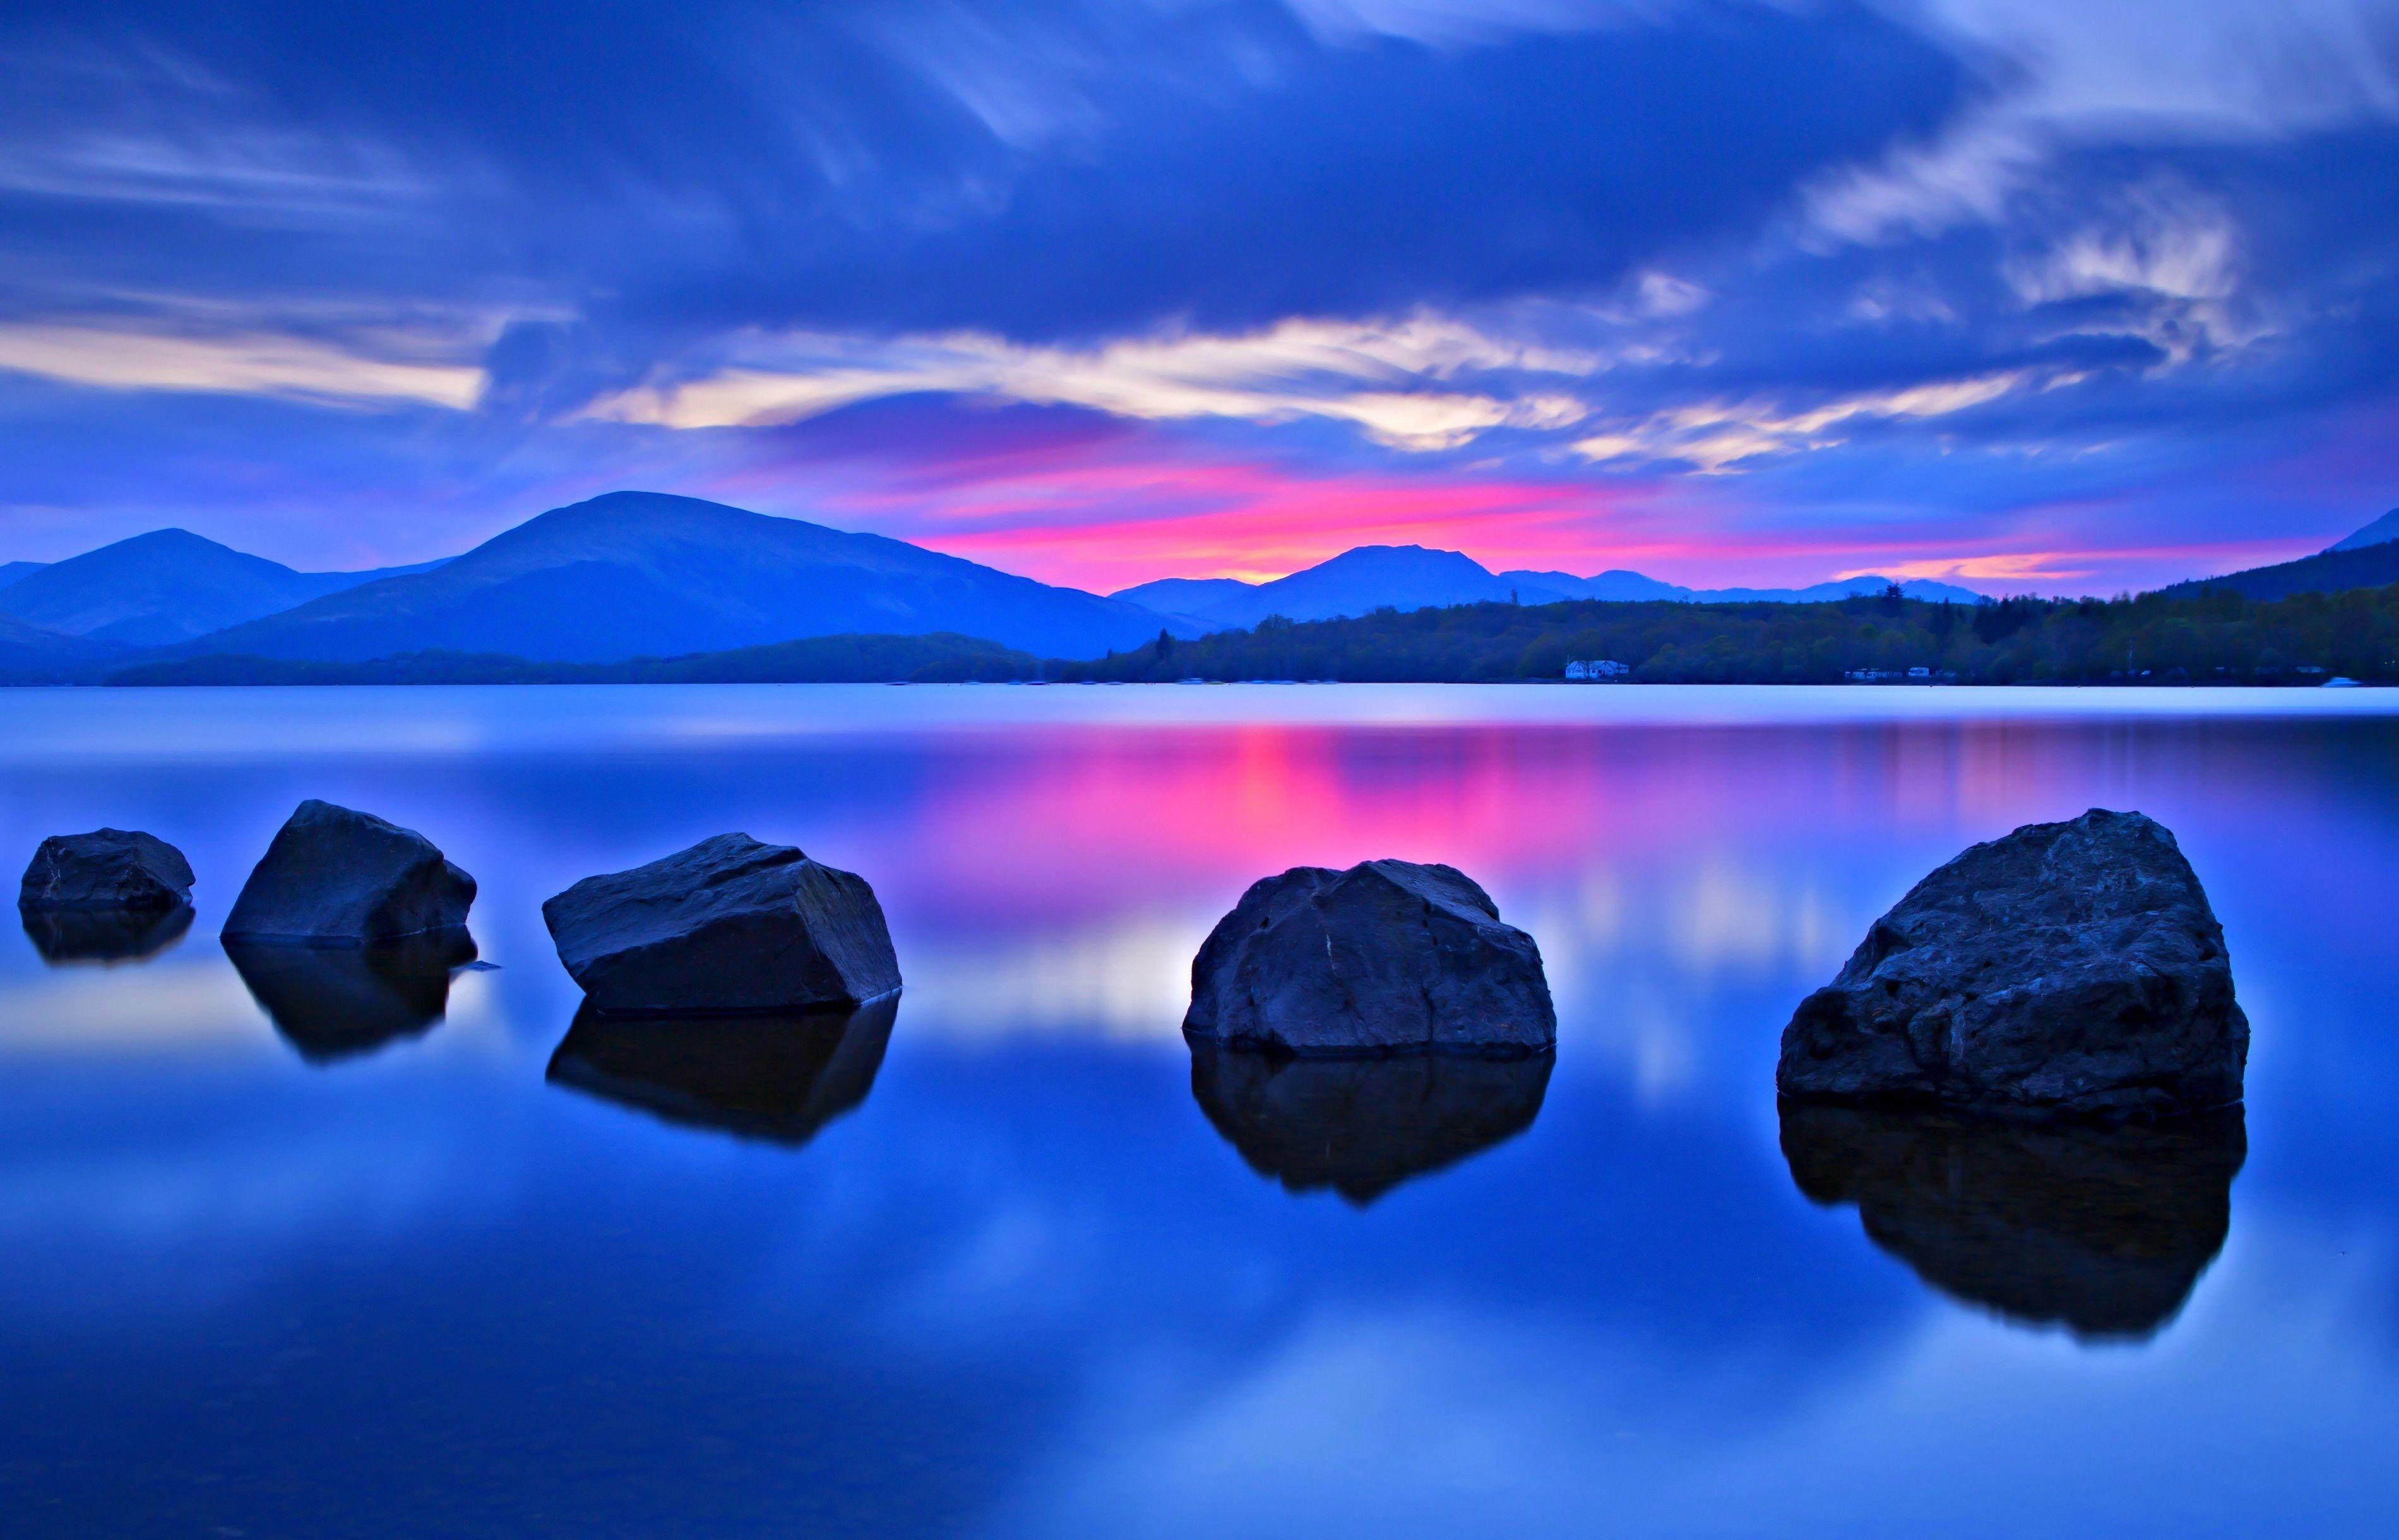 Lakes: Tranquil Lake Dusk Sunset Blue Peaceful Sky Scenic Pink